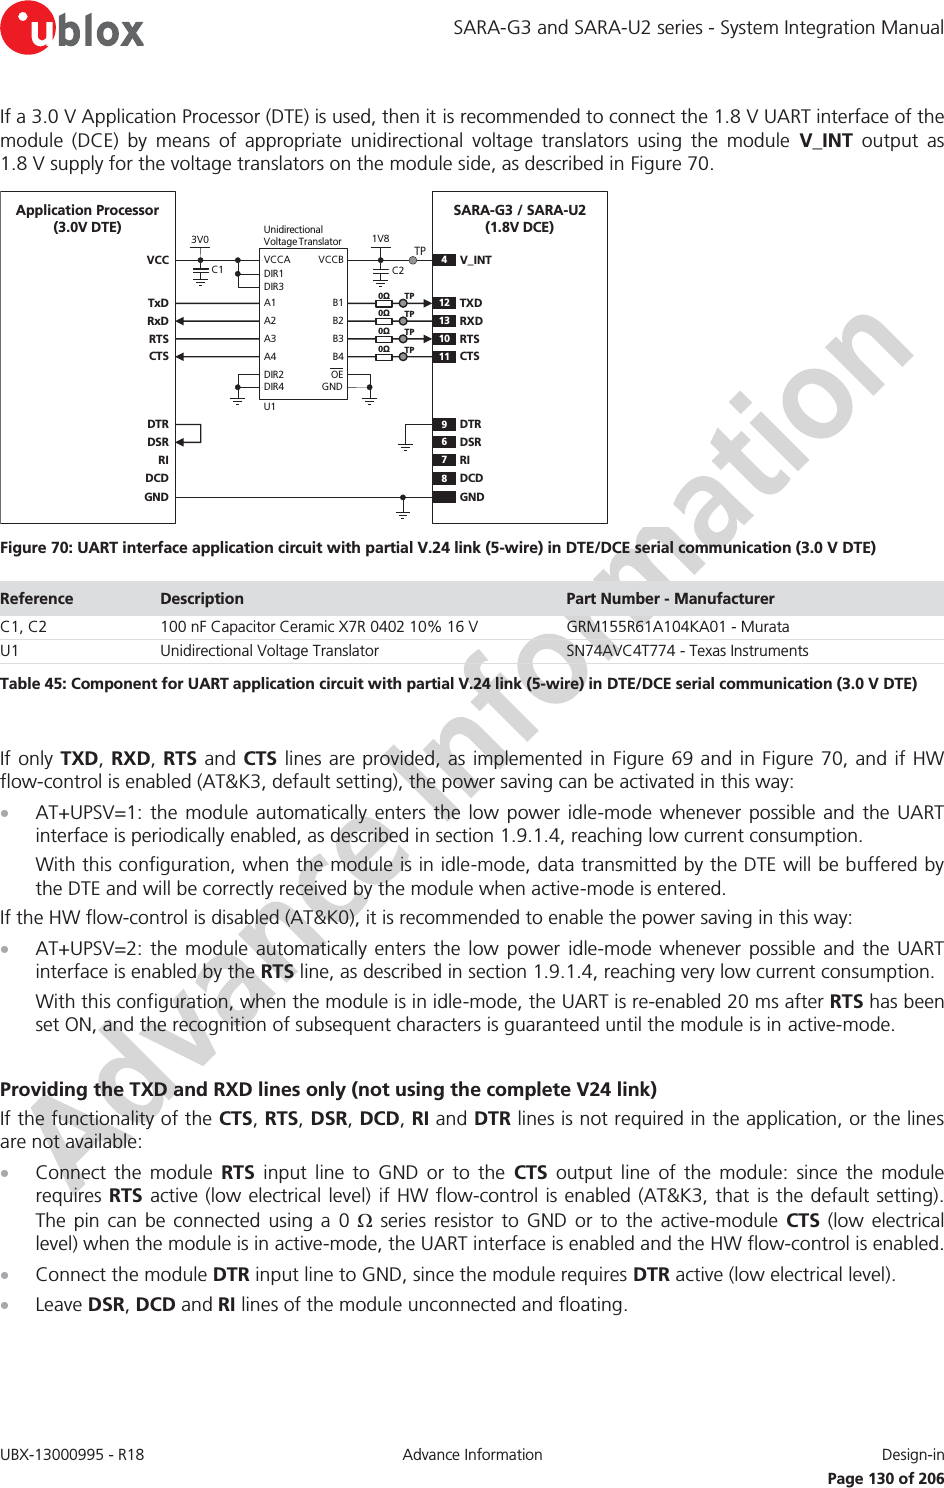 SARA-G3 and SARA-U2 series - System Integration Manual UBX-13000995 - R18  Advance Information  Design-in   Page 130 of 206 If a 3.0 V Application Processor (DTE) is used, then it is recommended to connect the 1.8 V UART interface of the module (DCE) by means of appropriate unidirectional voltage translators using the module V_INT output as 1.8 V supply for the voltage translators on the module side, as described in Figure 70. 4V_INTTxDApplication Processor(3.0V DTE)RxDRTSCTSDTRDSRRIDCDGNDSARA-G3 / SARA-U2(1.8V DCE)12 TXD9DTR13RXD10RTS11CTS6DSR7RI8DCDGND1V8B1 A1GNDU1B3A3VCCBVCCAUnidirectionalVoltage TranslatorC1 C23V0DIR3DIR2 OEDIR1VCCB2 A2B4A4DIR4TP0ΩTP0ΩTP0ΩTP0ΩTP Figure 70: UART interface application circuit with partial V.24 link (5-wire) in DTE/DCE serial communication (3.0 V DTE) Reference  Description  Part Number - Manufacturer C1, C2 100 nF Capacitor Ceramic X7R 0402 10% 16 V GRM155R61A104KA01 - Murata U1 Unidirectional Voltage Translator SN74AVC4T774 - Texas Instruments Table 45: Component for UART application circuit with partial V.24 link (5-wire) in DTE/DCE serial communication (3.0 V DTE)  If only TXD, RXD, RTS and CTS lines are provided, as implemented in Figure 69 and in Figure 70, and if HW flow-control is enabled (AT&amp;K3, default setting), the power saving can be activated in this way: x AT+UPSV=1: the module automatically enters the low power idle-mode whenever possible and the UART interface is periodically enabled, as described in section 1.9.1.4, reaching low current consumption. With this configuration, when the module is in idle-mode, data transmitted by the DTE will be buffered by the DTE and will be correctly received by the module when active-mode is entered. If the HW flow-control is disabled (AT&amp;K0), it is recommended to enable the power saving in this way: x AT+UPSV=2: the module automatically enters the low power idle-mode whenever possible and the UART interface is enabled by the RTS line, as described in section 1.9.1.4, reaching very low current consumption. With this configuration, when the module is in idle-mode, the UART is re-enabled 20 ms after RTS has been set ON, and the recognition of subsequent characters is guaranteed until the module is in active-mode.  Providing the TXD and RXD lines only (not using the complete V24 link) If the functionality of the CTS, RTS, DSR, DCD, RI and DTR lines is not required in the application, or the lines are not available: x Connect the module RTS input line to GND or to the CTS output line of the module: since the module requires RTS active (low electrical level) if HW flow-control is enabled (AT&amp;K3, that is the default setting). The pin can be connected using a 0 : series resistor to GND or to the active-module CTS (low electrical level) when the module is in active-mode, the UART interface is enabled and the HW flow-control is enabled. x Connect the module DTR input line to GND, since the module requires DTR active (low electrical level). x Leave DSR, DCD and RI lines of the module unconnected and floating.  